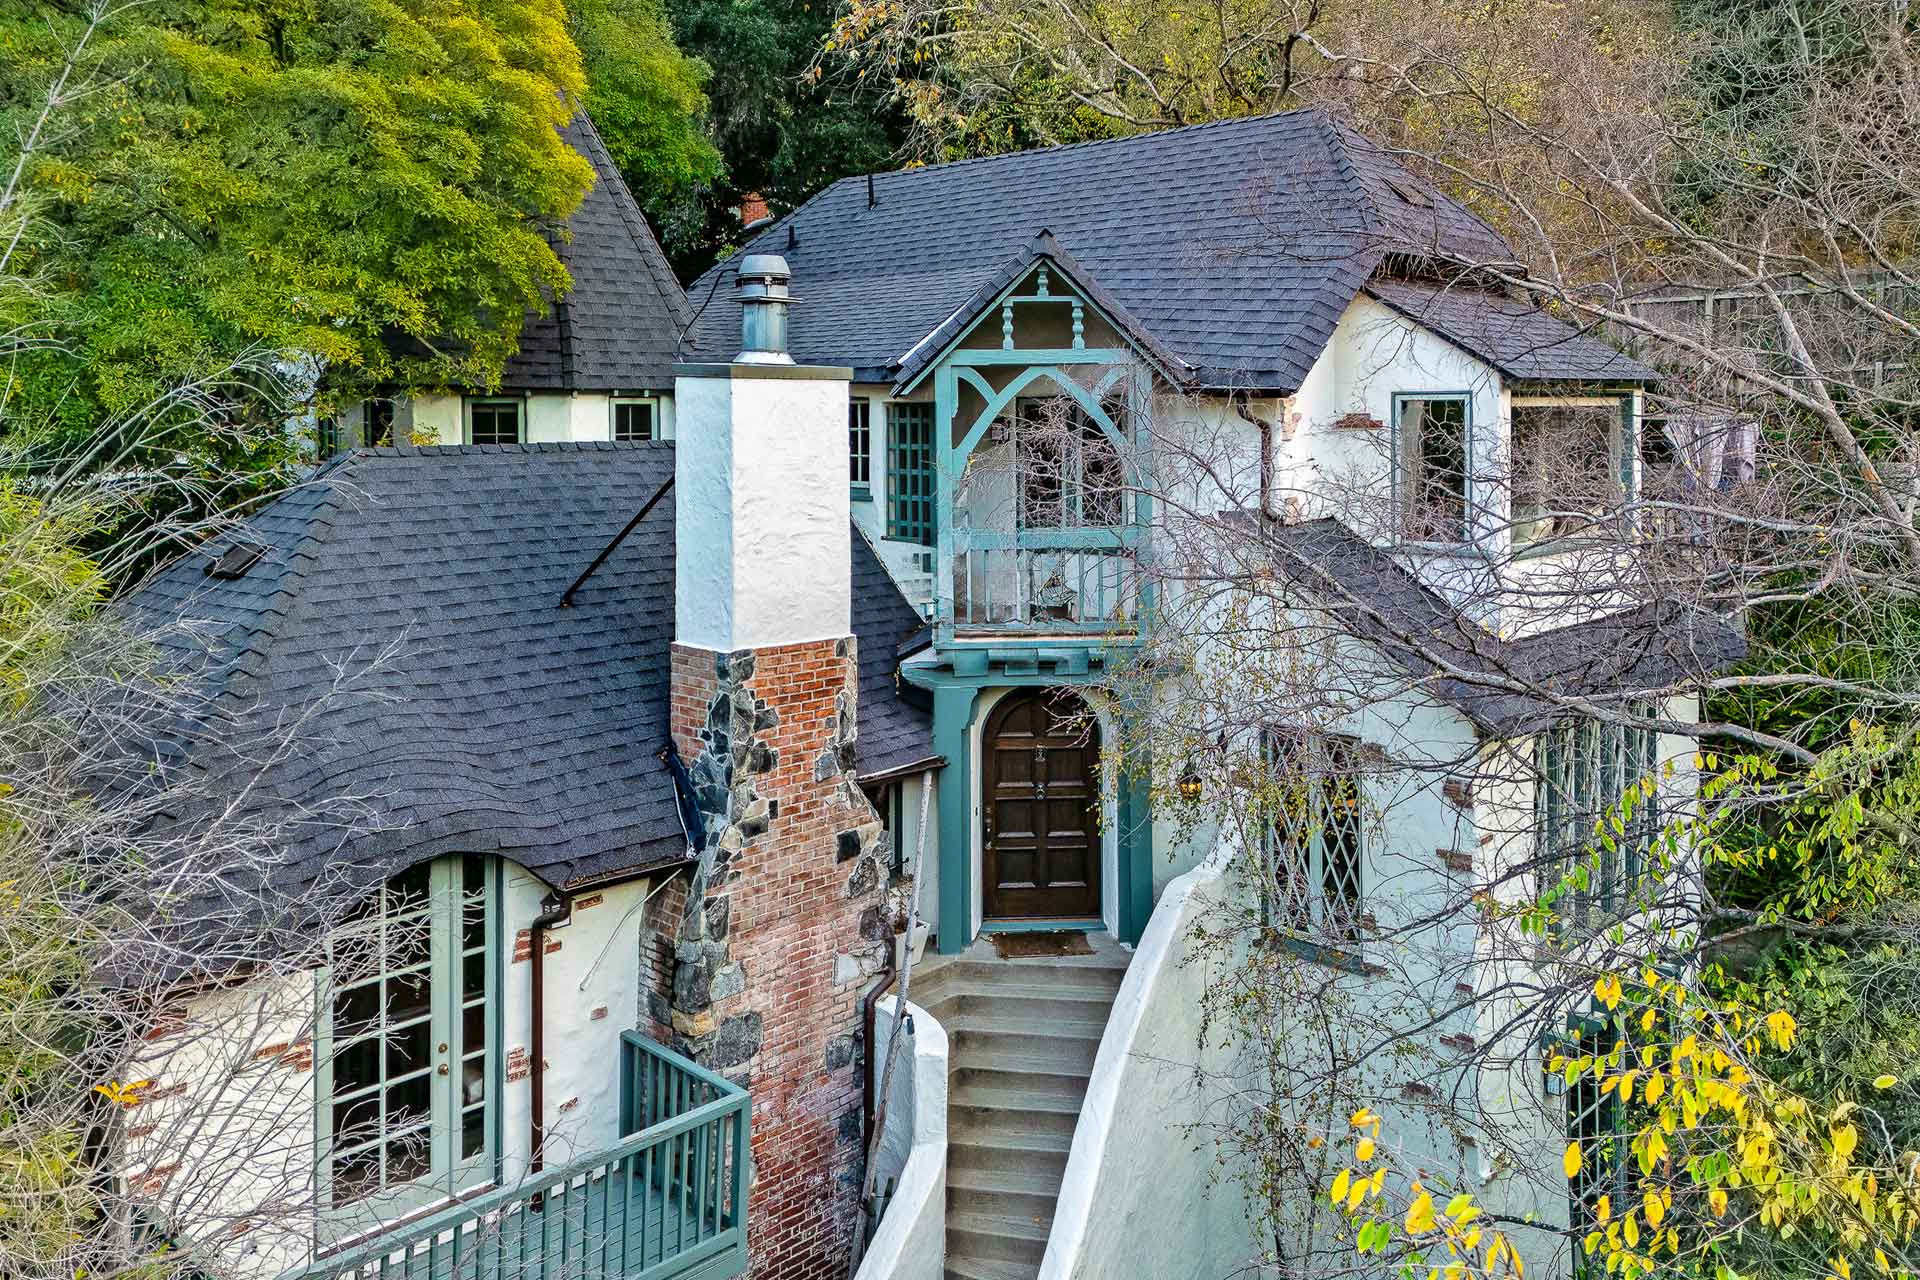 Exterior of Laurel Canyon cottage with slate roof and mint-green terraces.